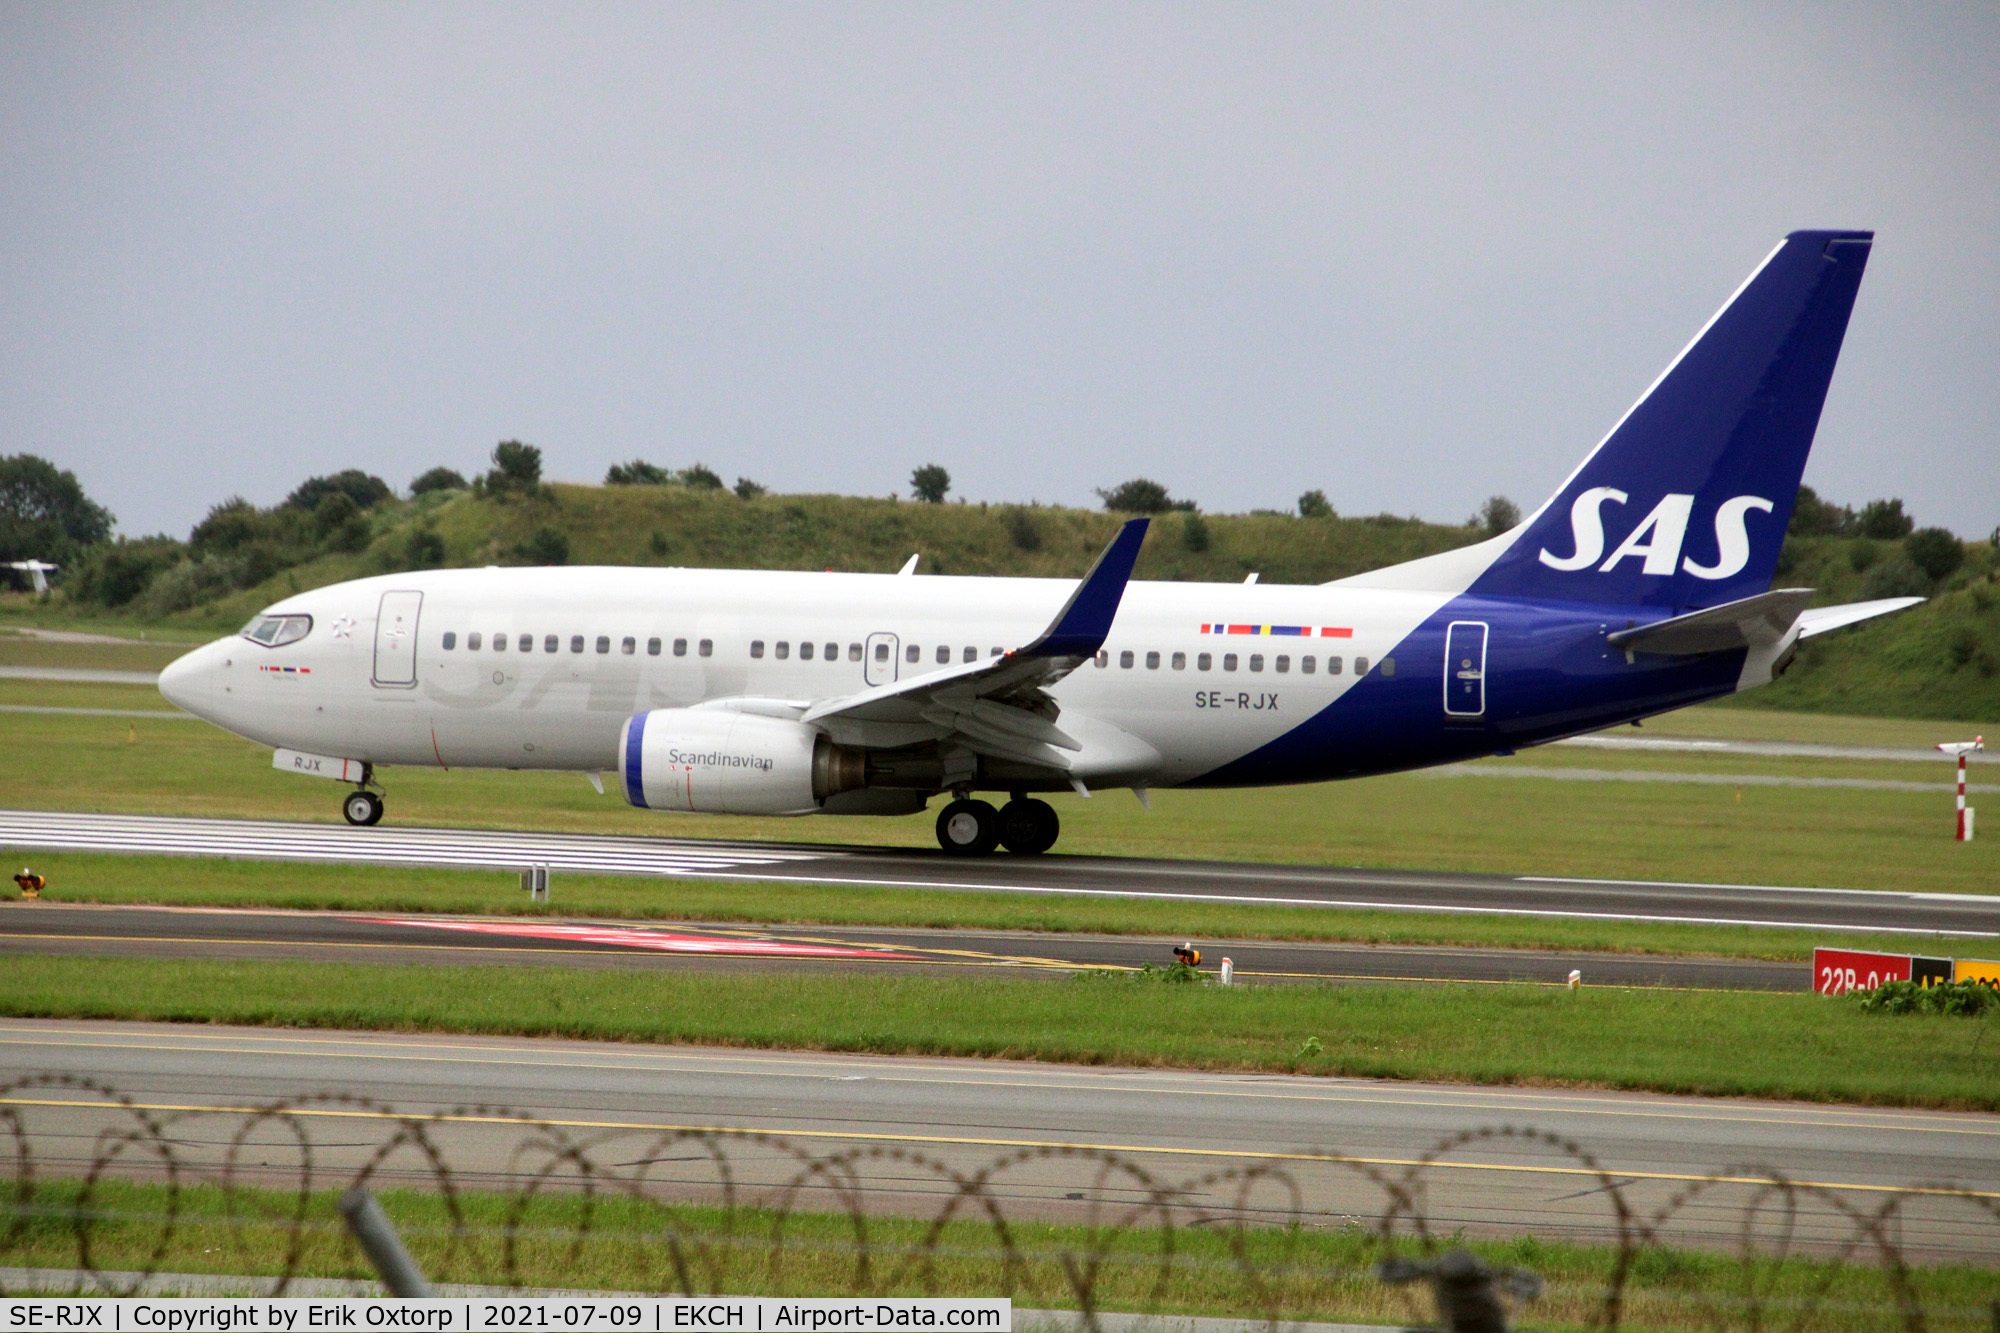 SE-RJX, 2007 Boeing 737-76N C/N 34754, A very rare visitor in CPH, the only SAS 737 in the new SAS design.
Landed rw 04L